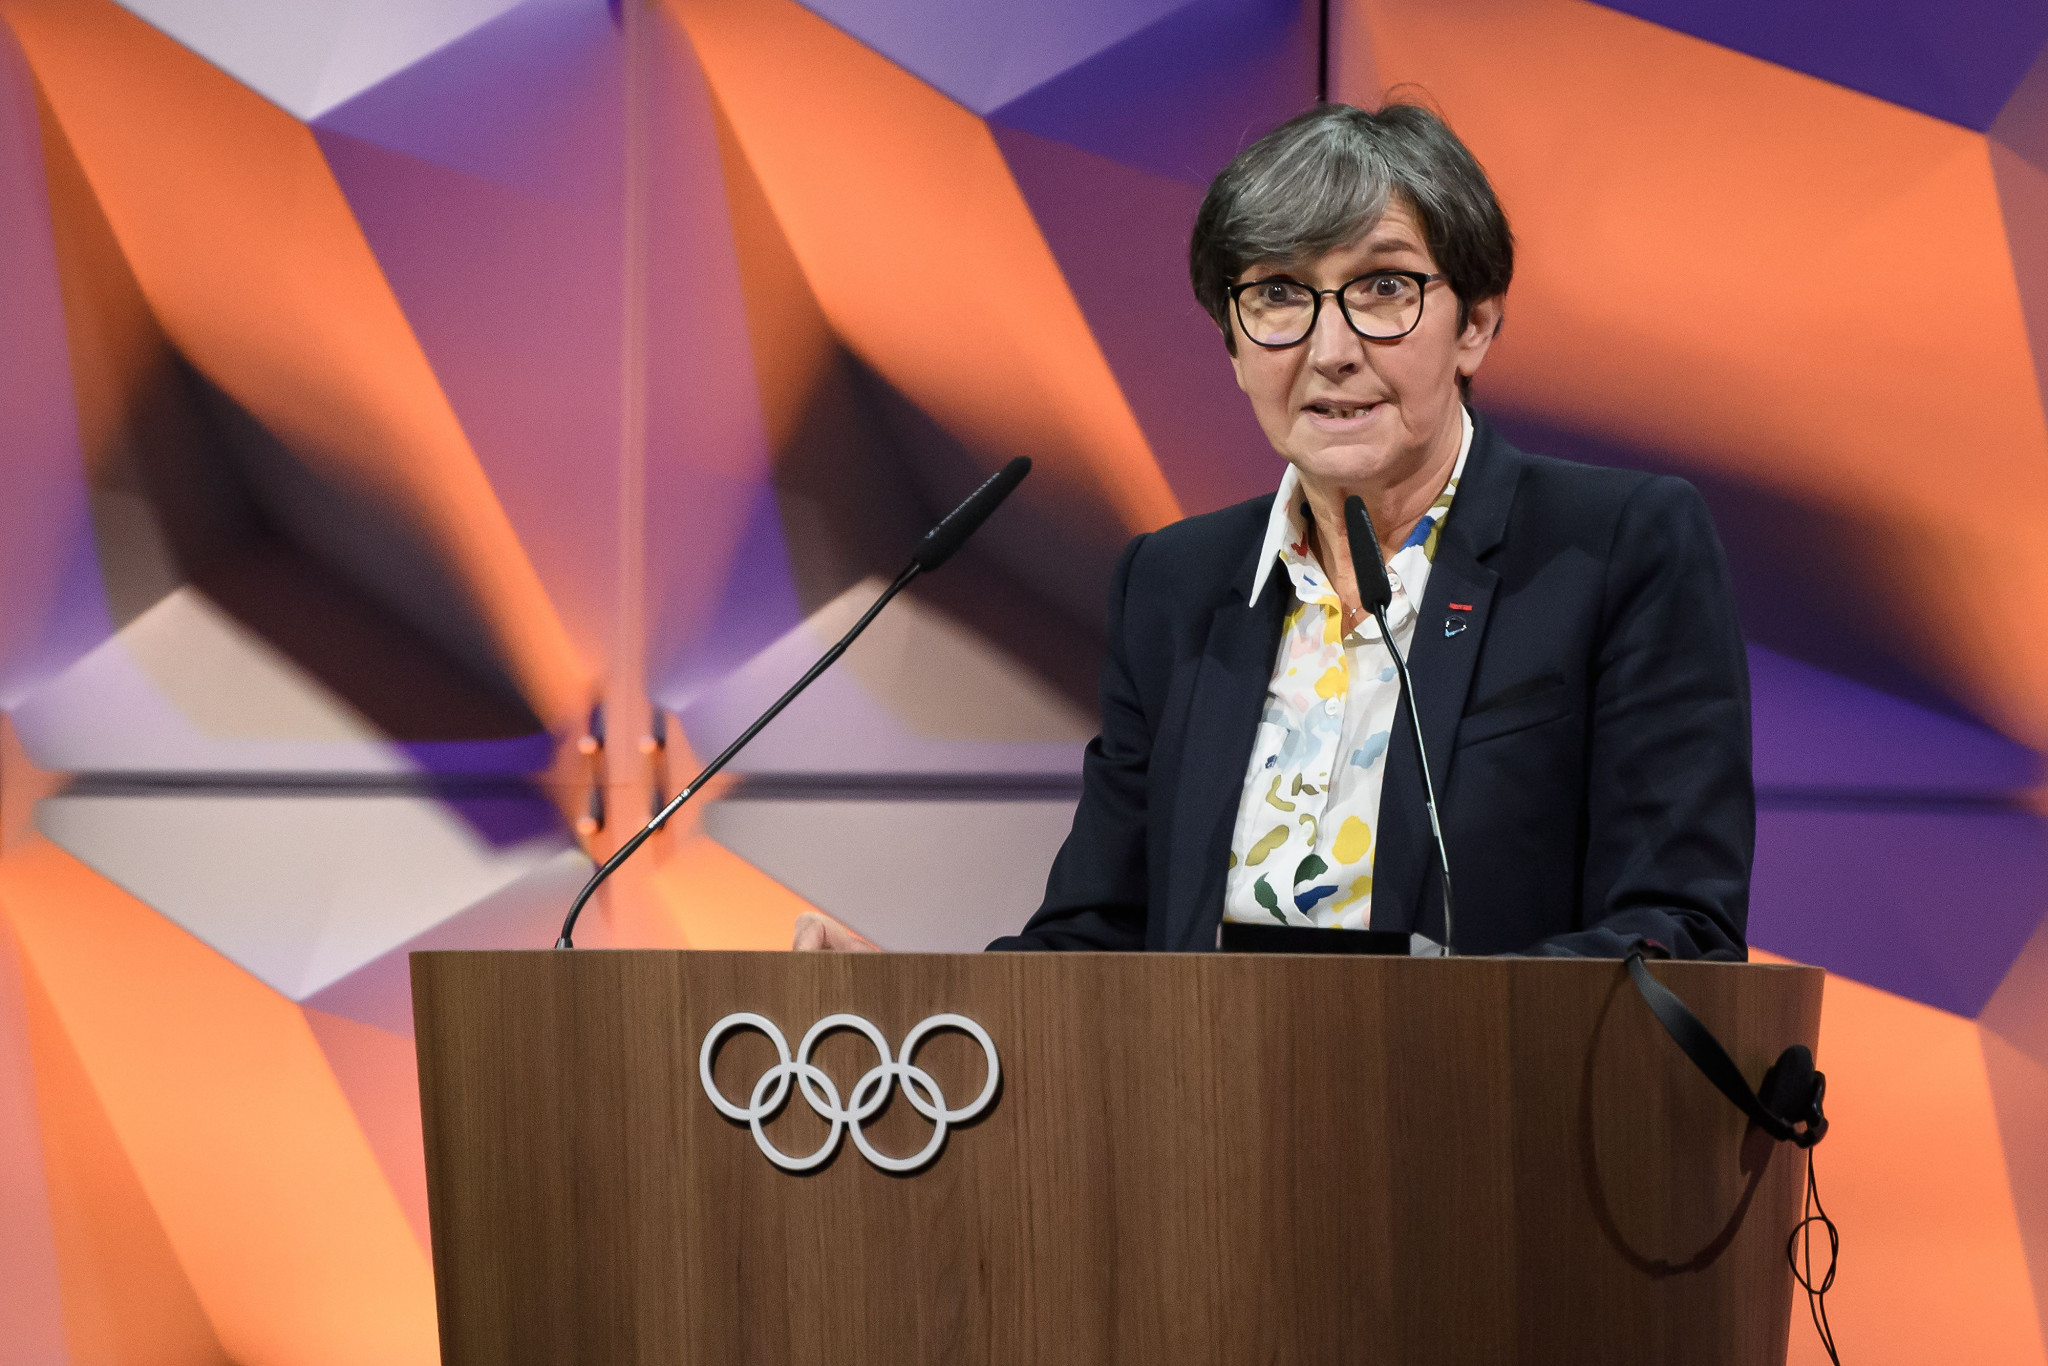 ITA chair Valerie Fourneyron gave an update on testing plans for Lausanne 2020 and Tokyo 2020 ©IOC